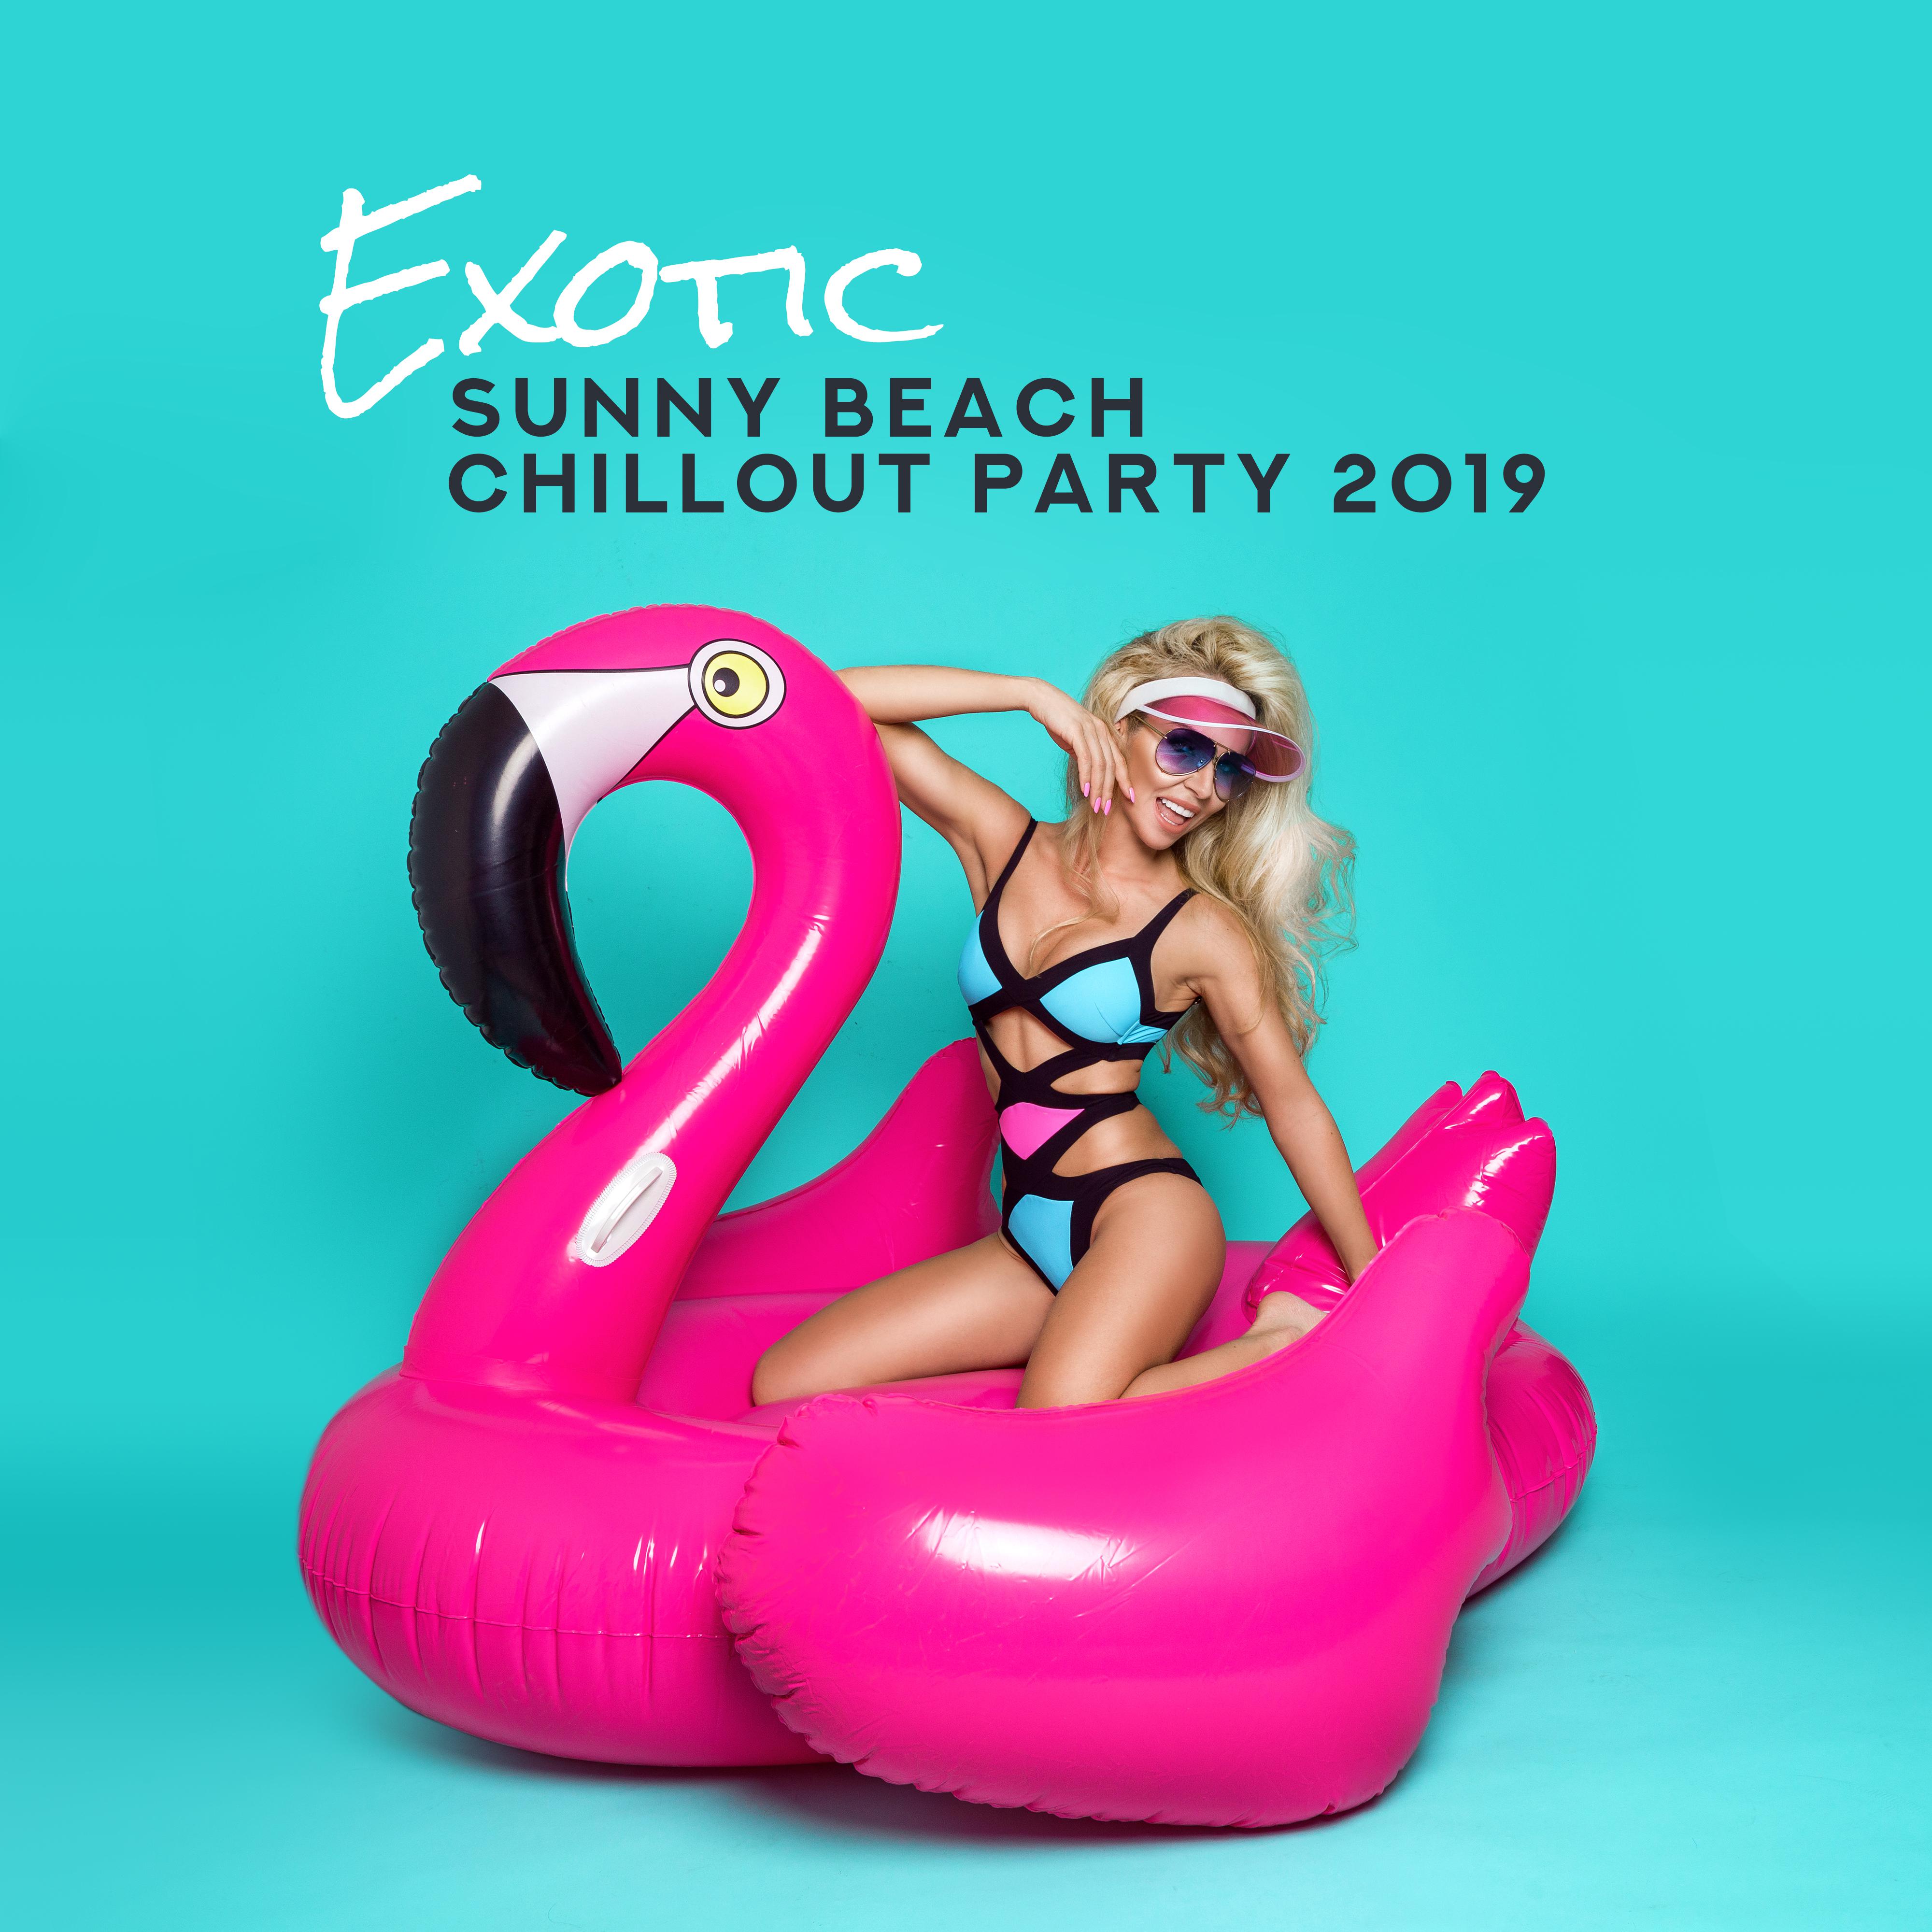 Exotic Sunny Beach Chillout Party 2019